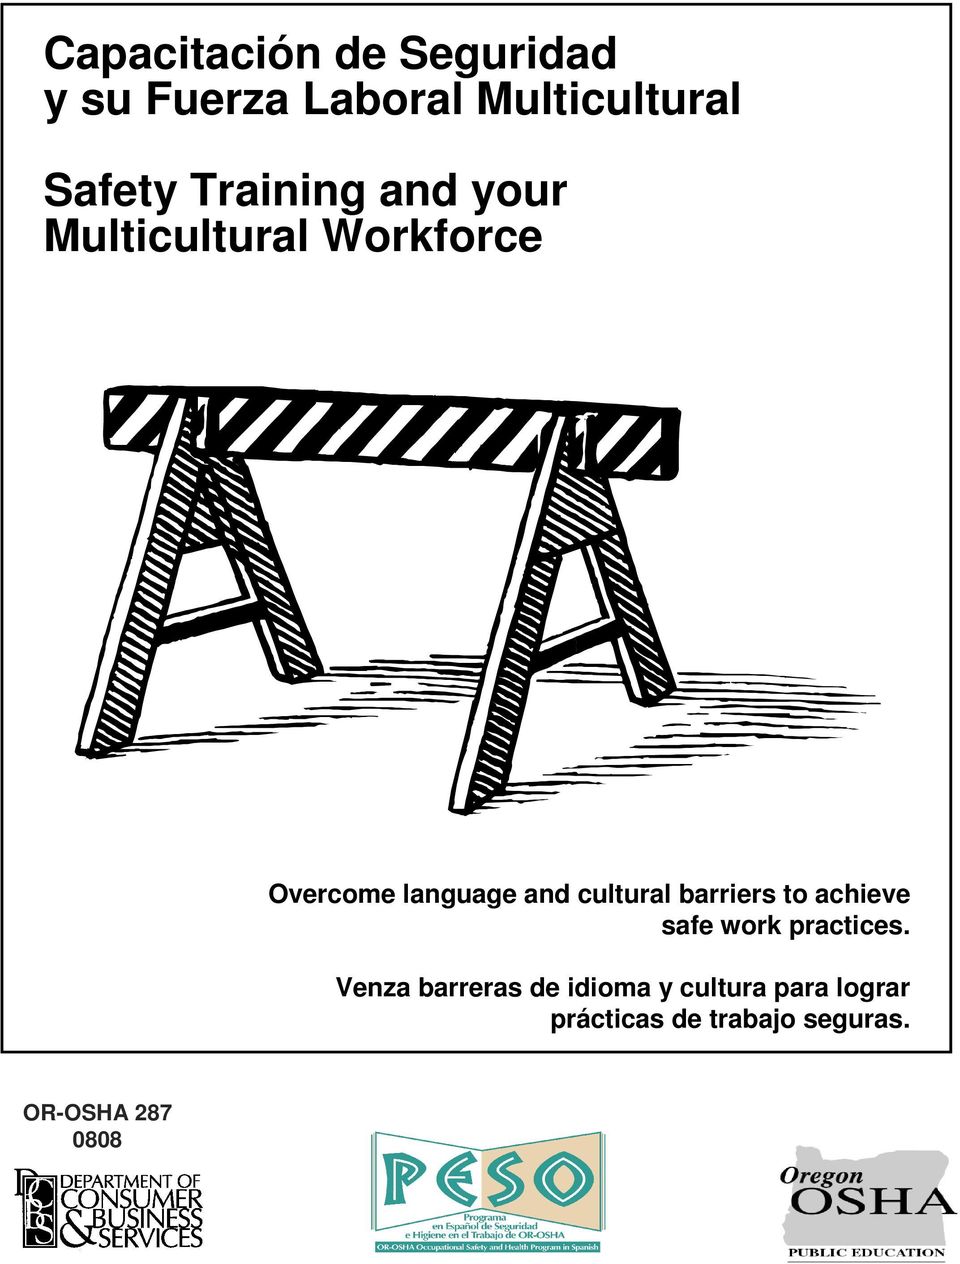 cultural barriers to achieve safe work practices.